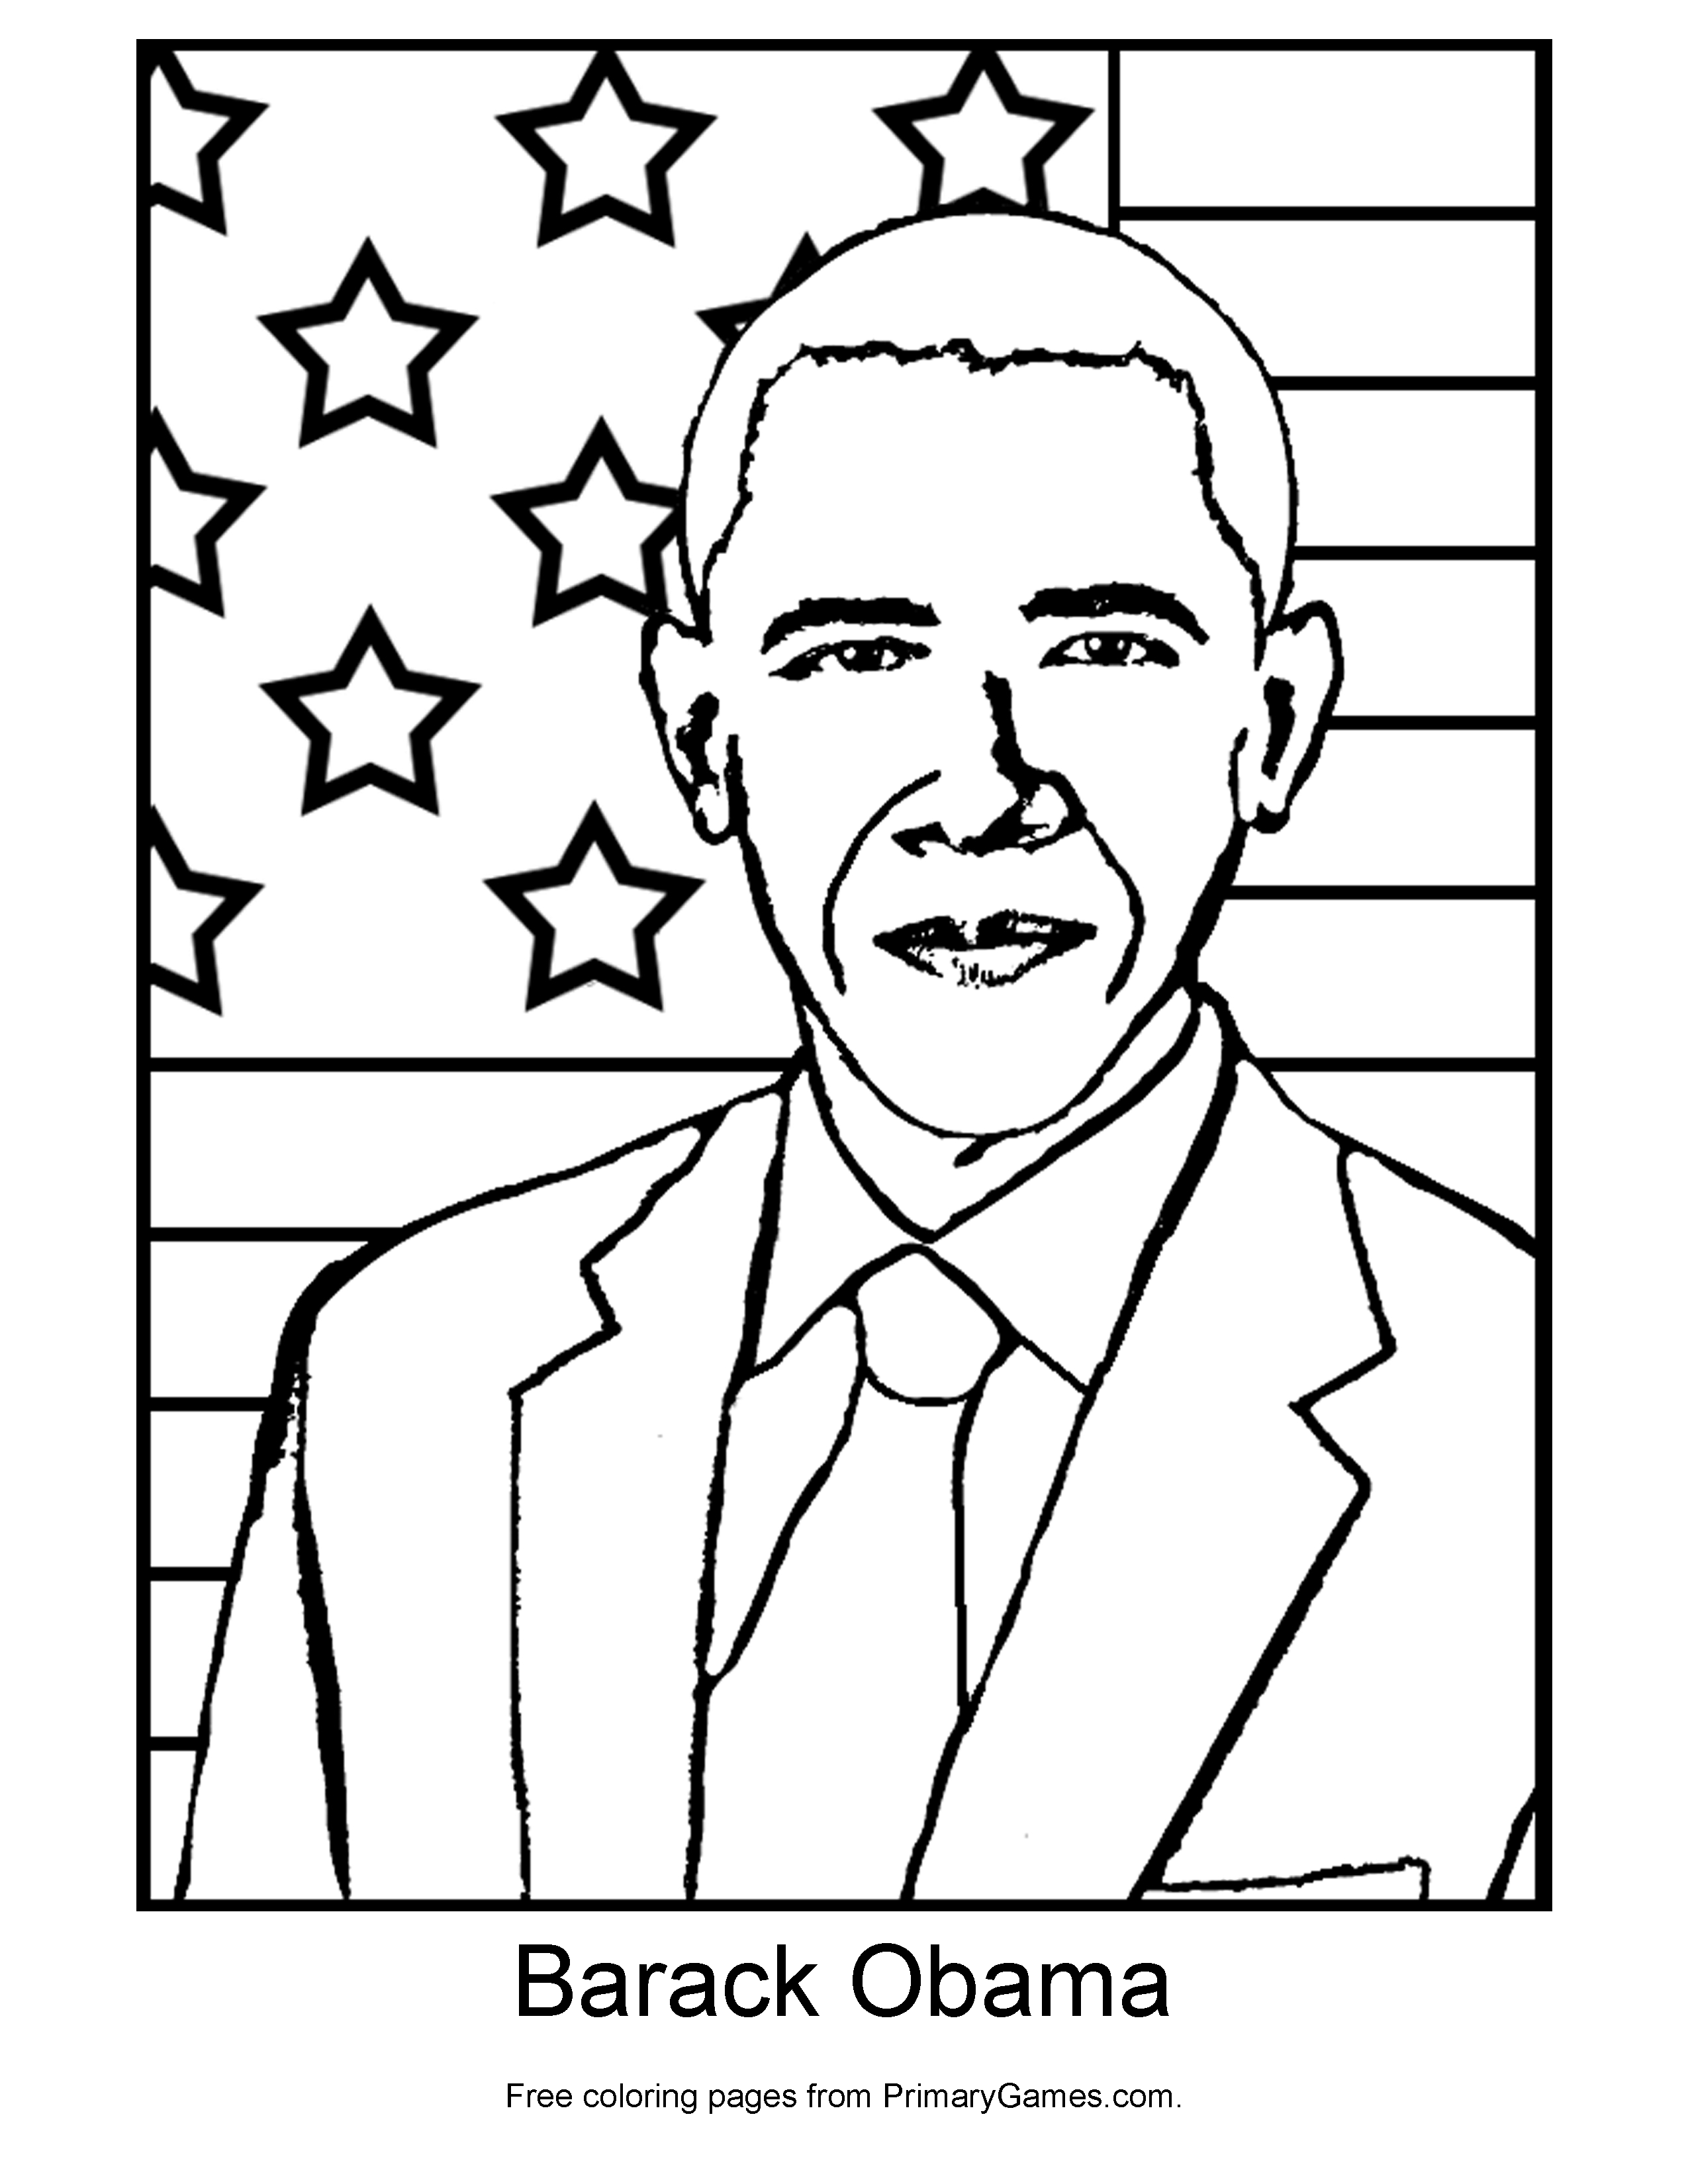 Presidents' Day Coloring Page: Barack Obama - Primarygames - Play